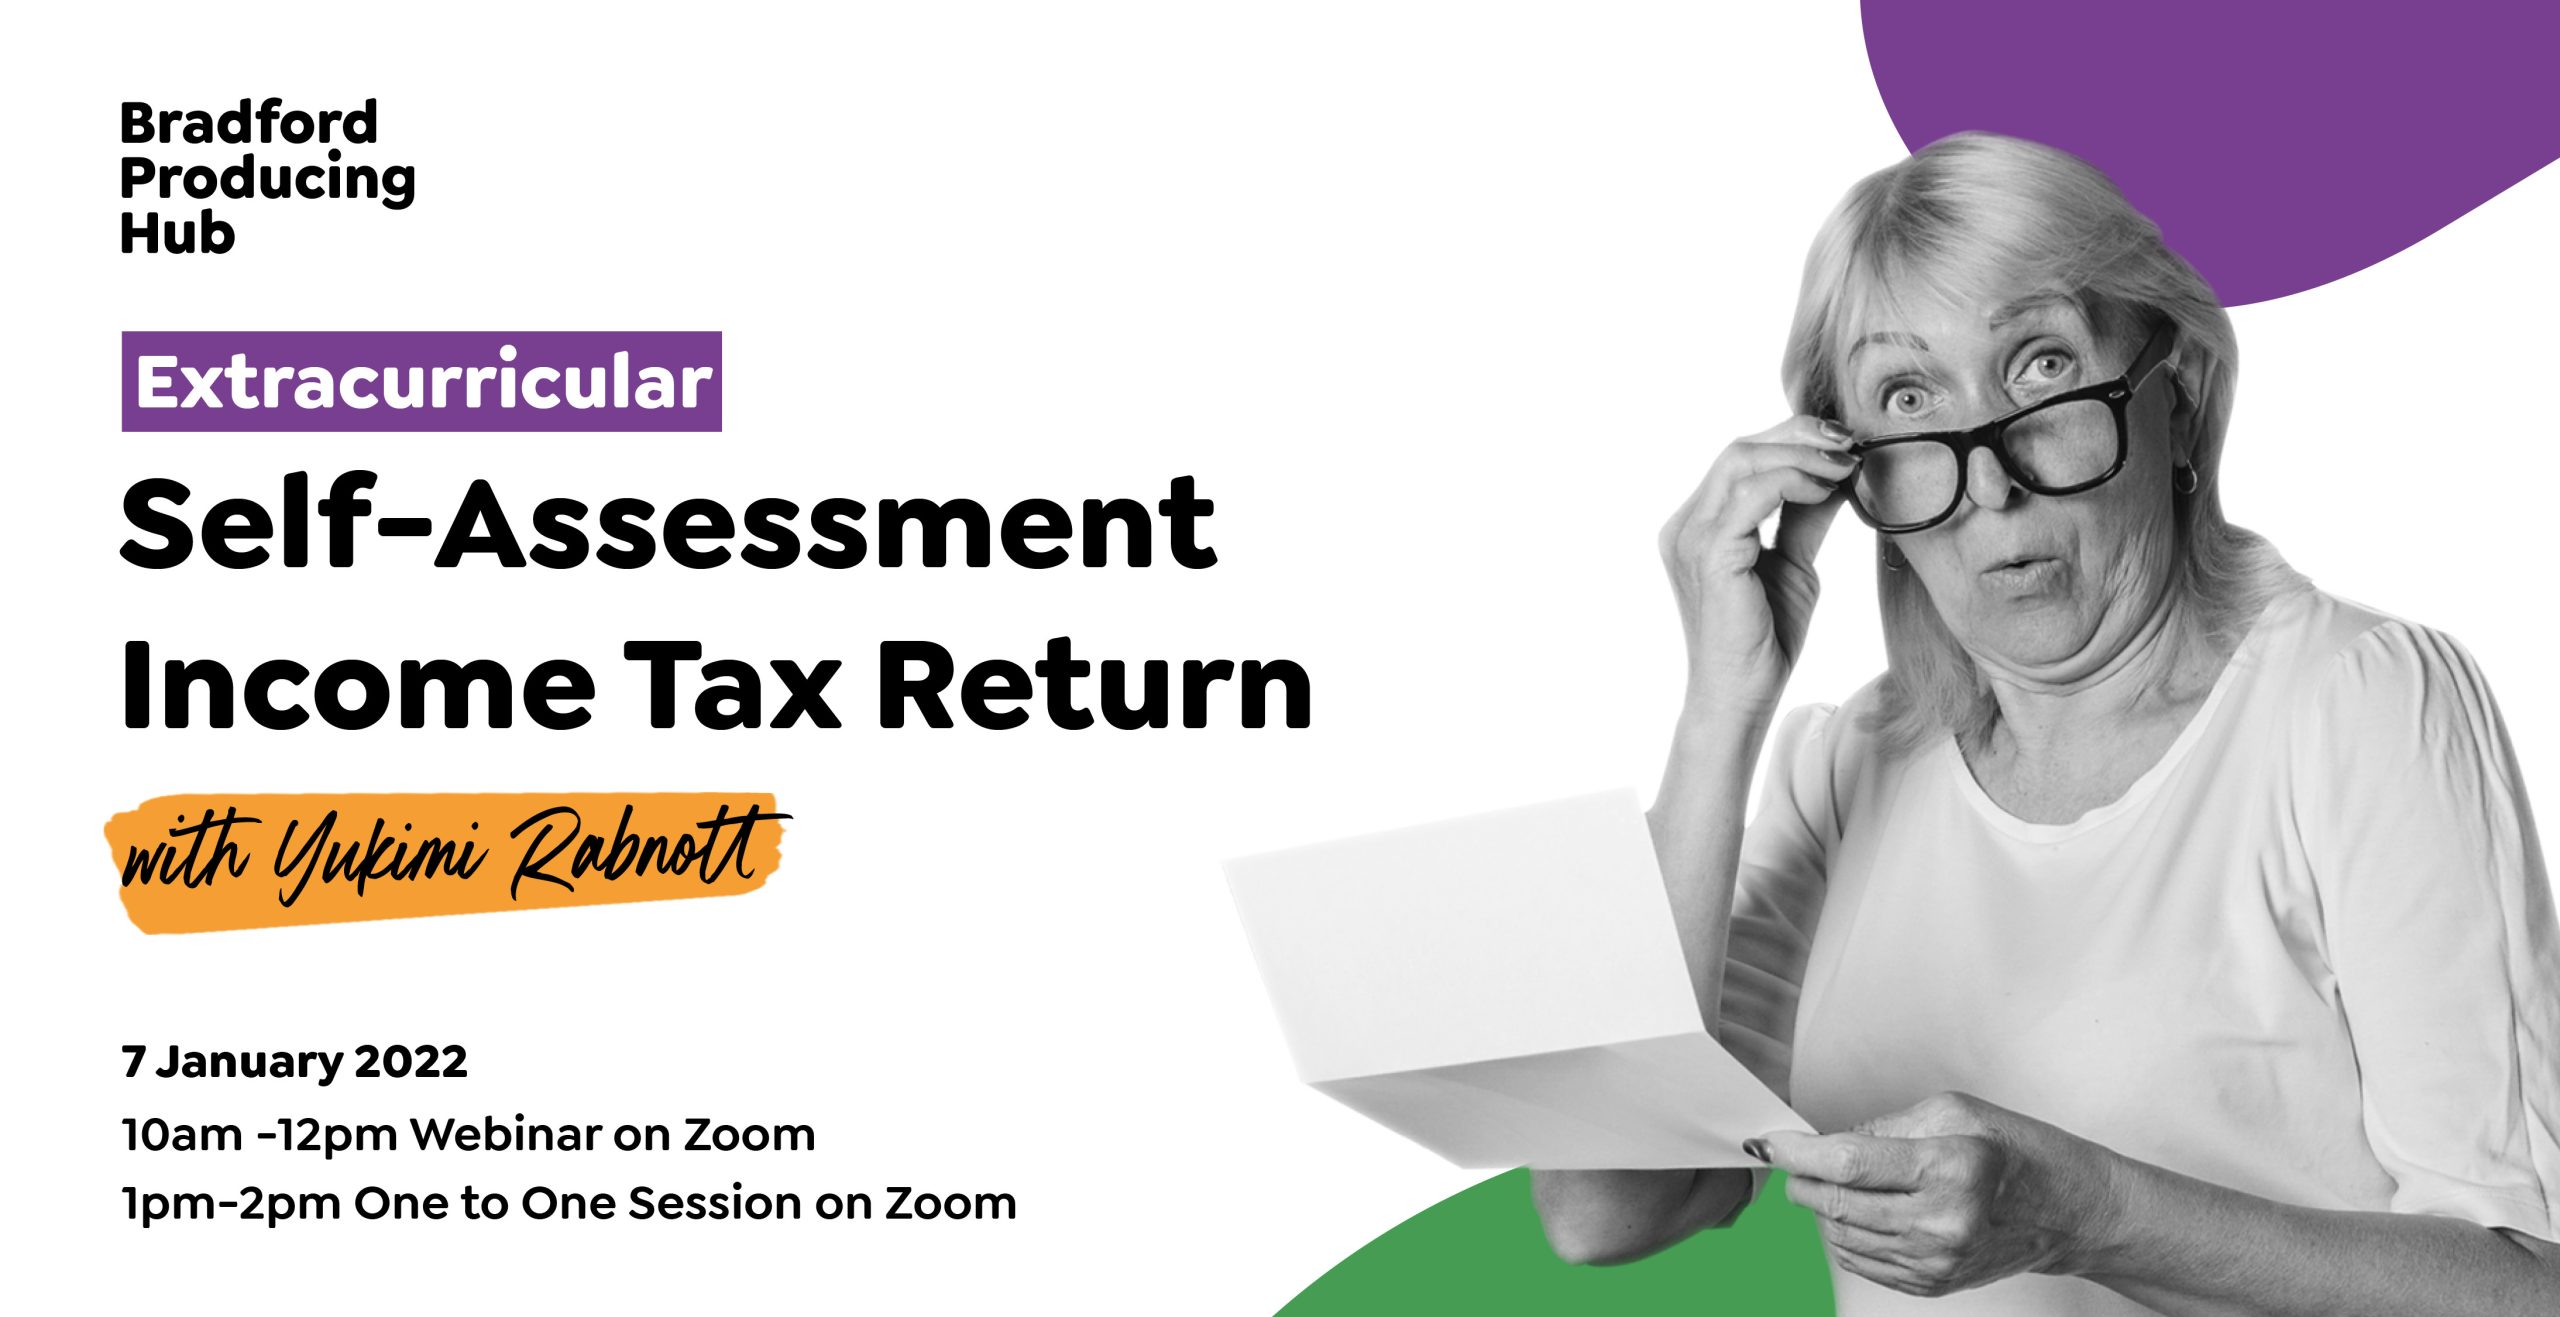 Extracurricular: Self-Assessment Income Tax Return is a practical session for people who complete self-assessment income tax returns online